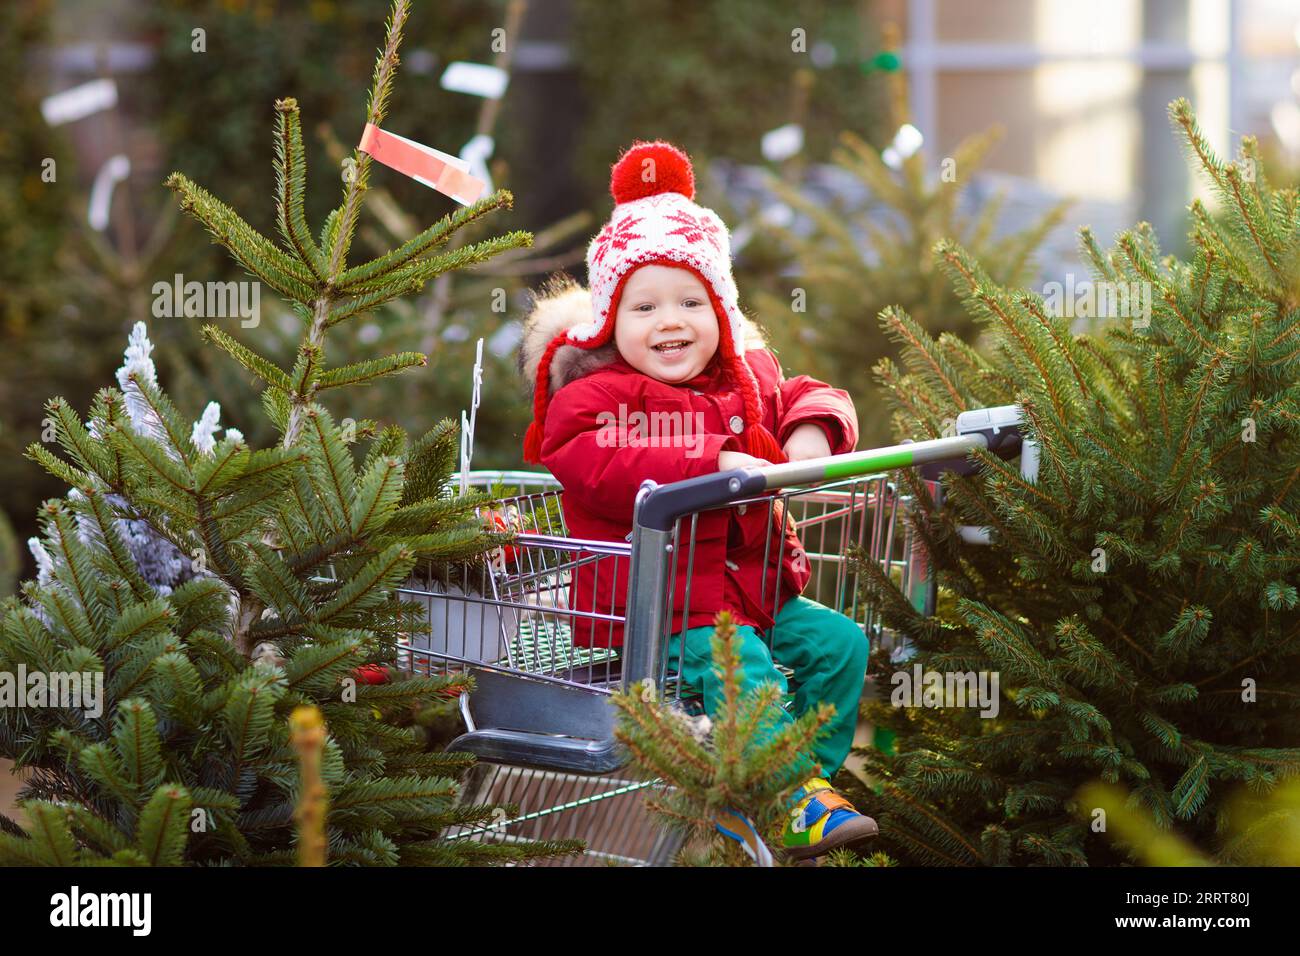 Family selecting Christmas tree. Kids choosing freshly cut Norway Xmas tree at outdoor lot. Children buying gifts at winter fair. Stock Photo